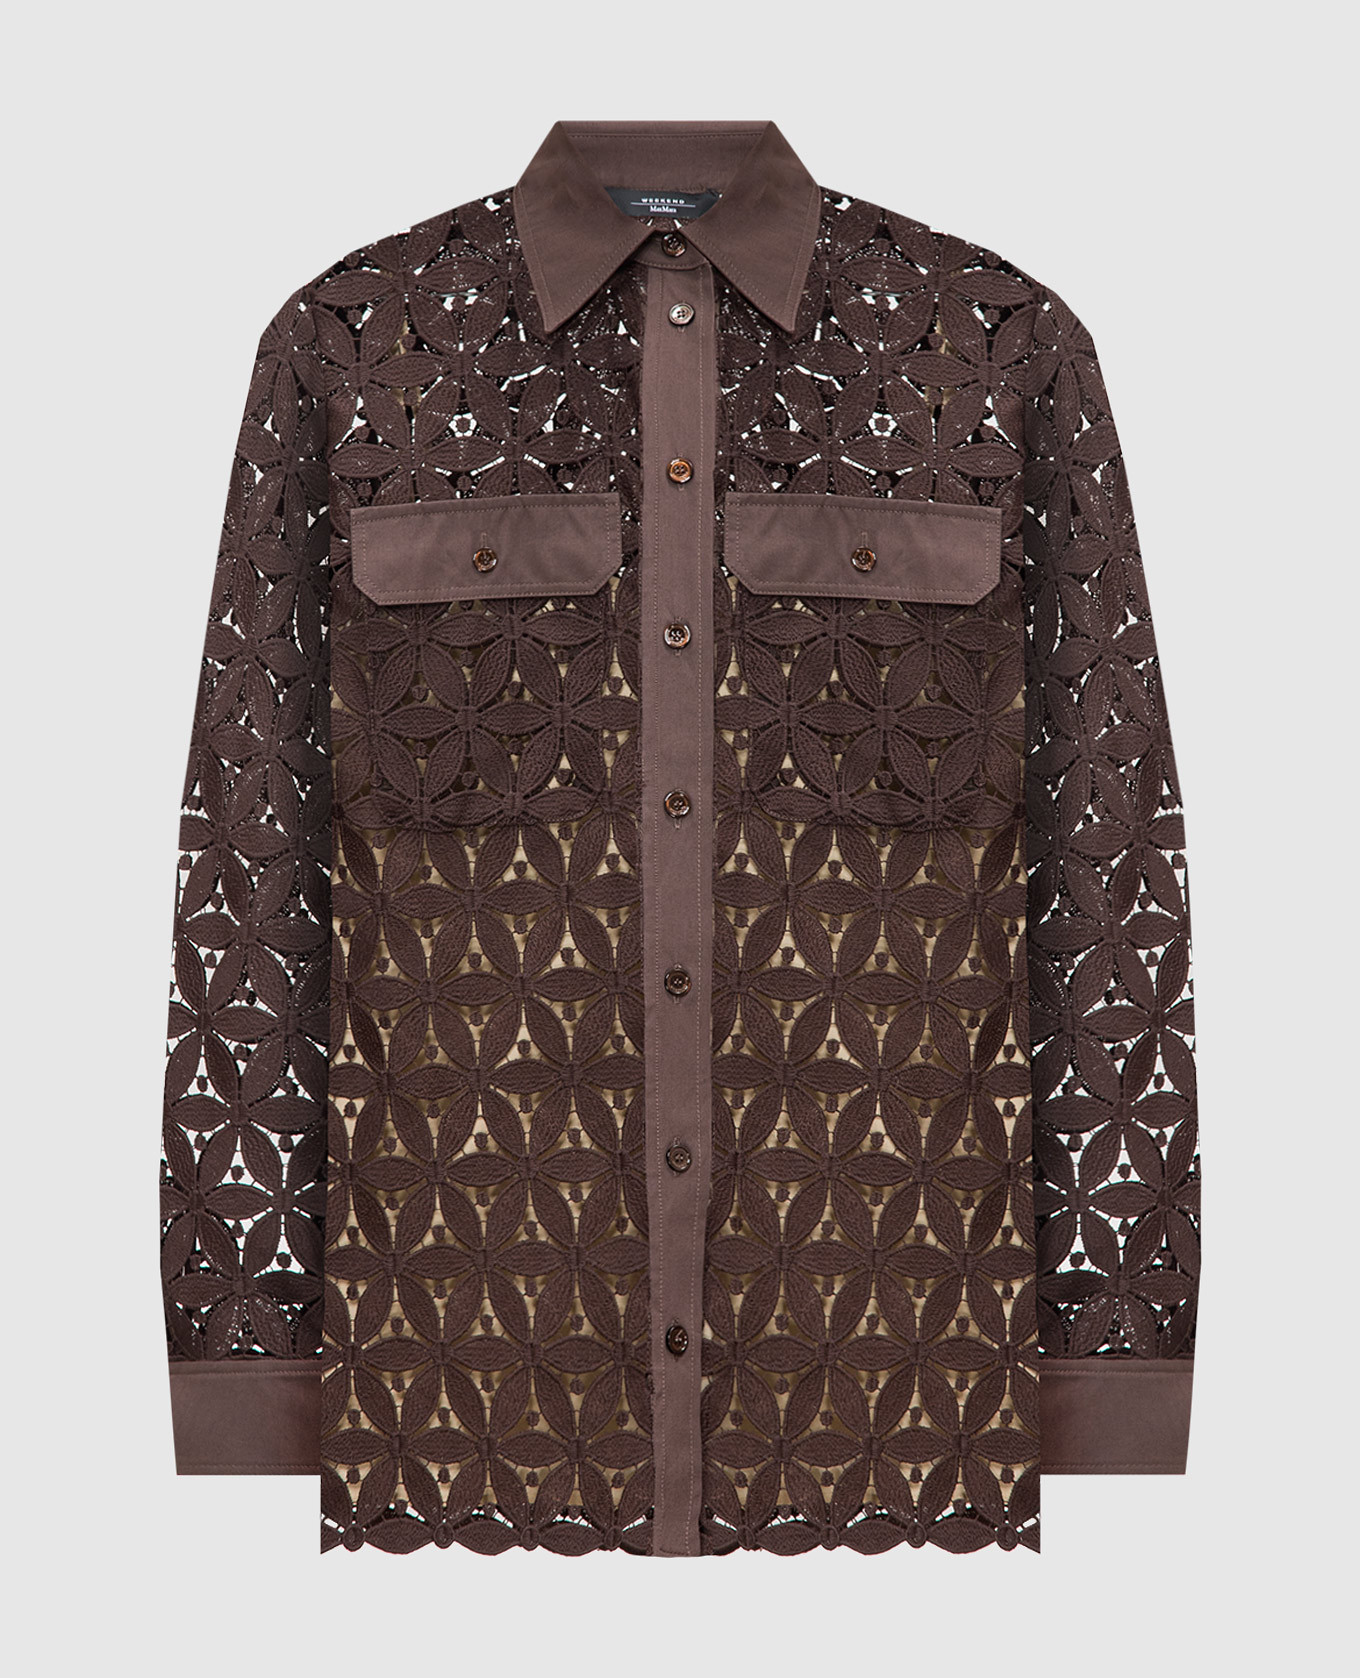 AFONA brown openwork blouse with embroidery